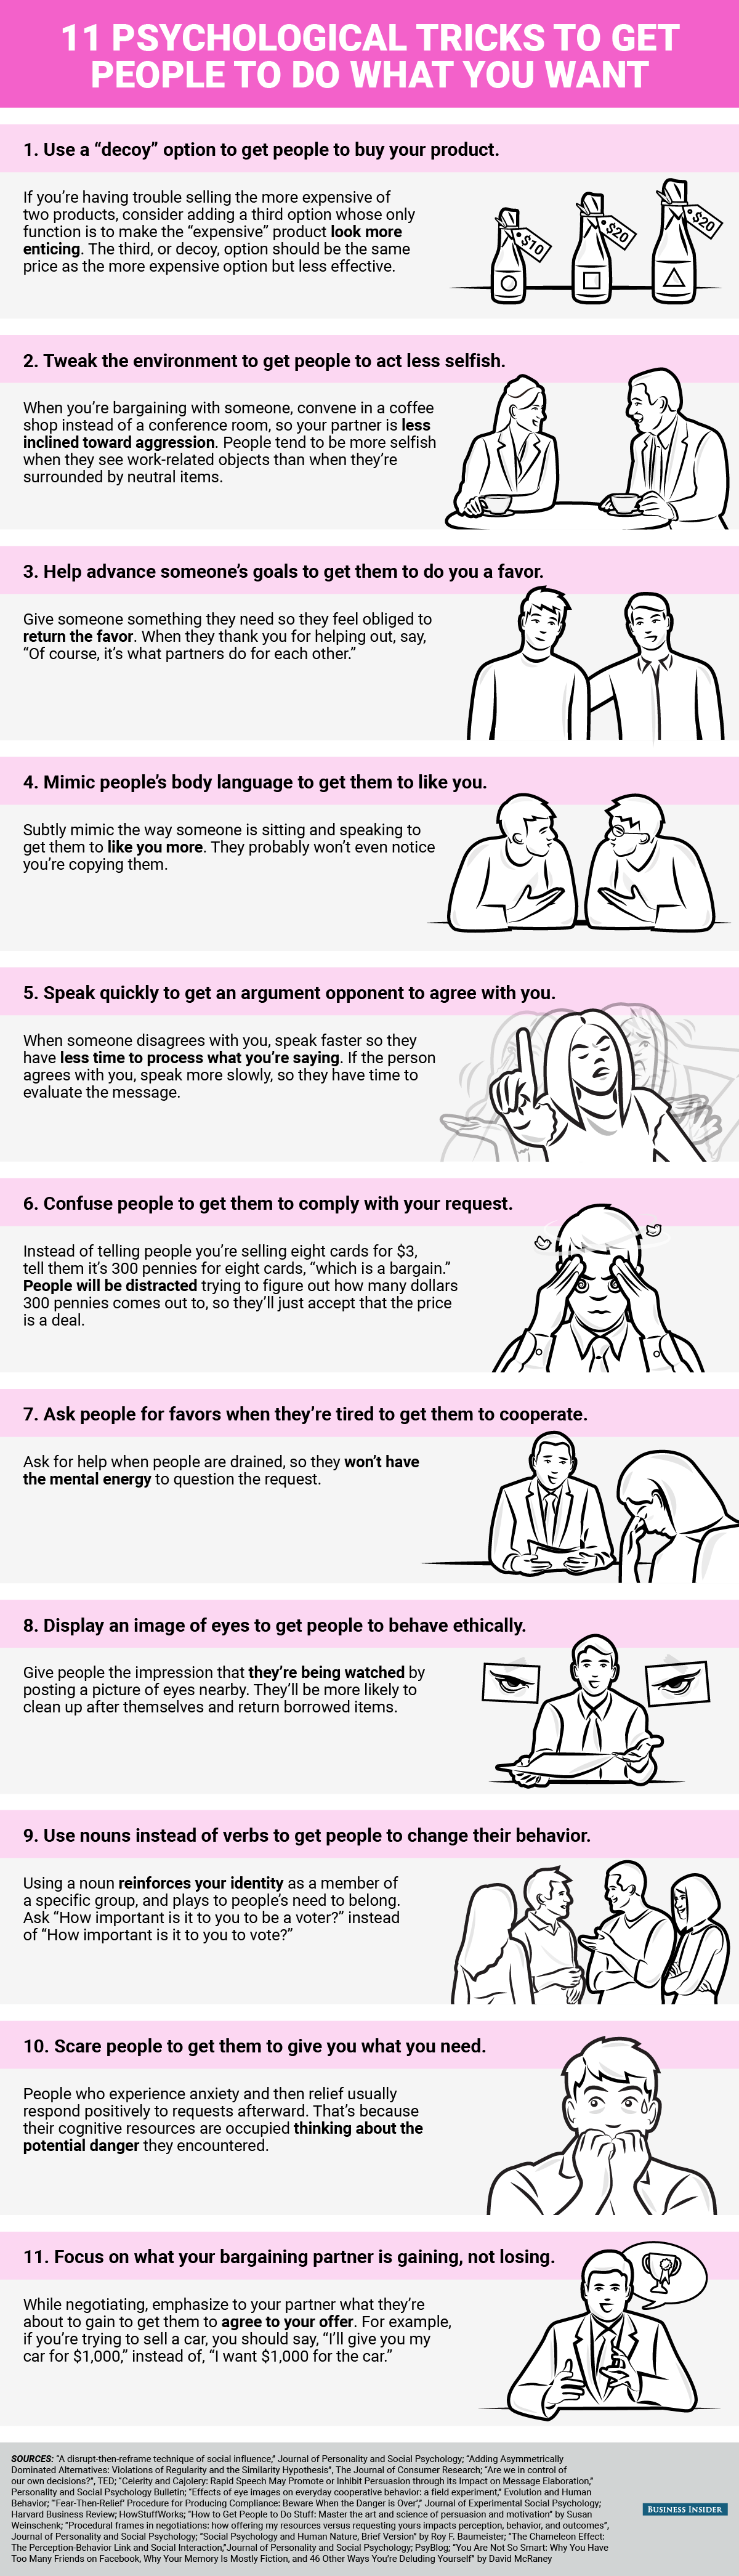 11 incredible psychological tricks to get people to do what you want